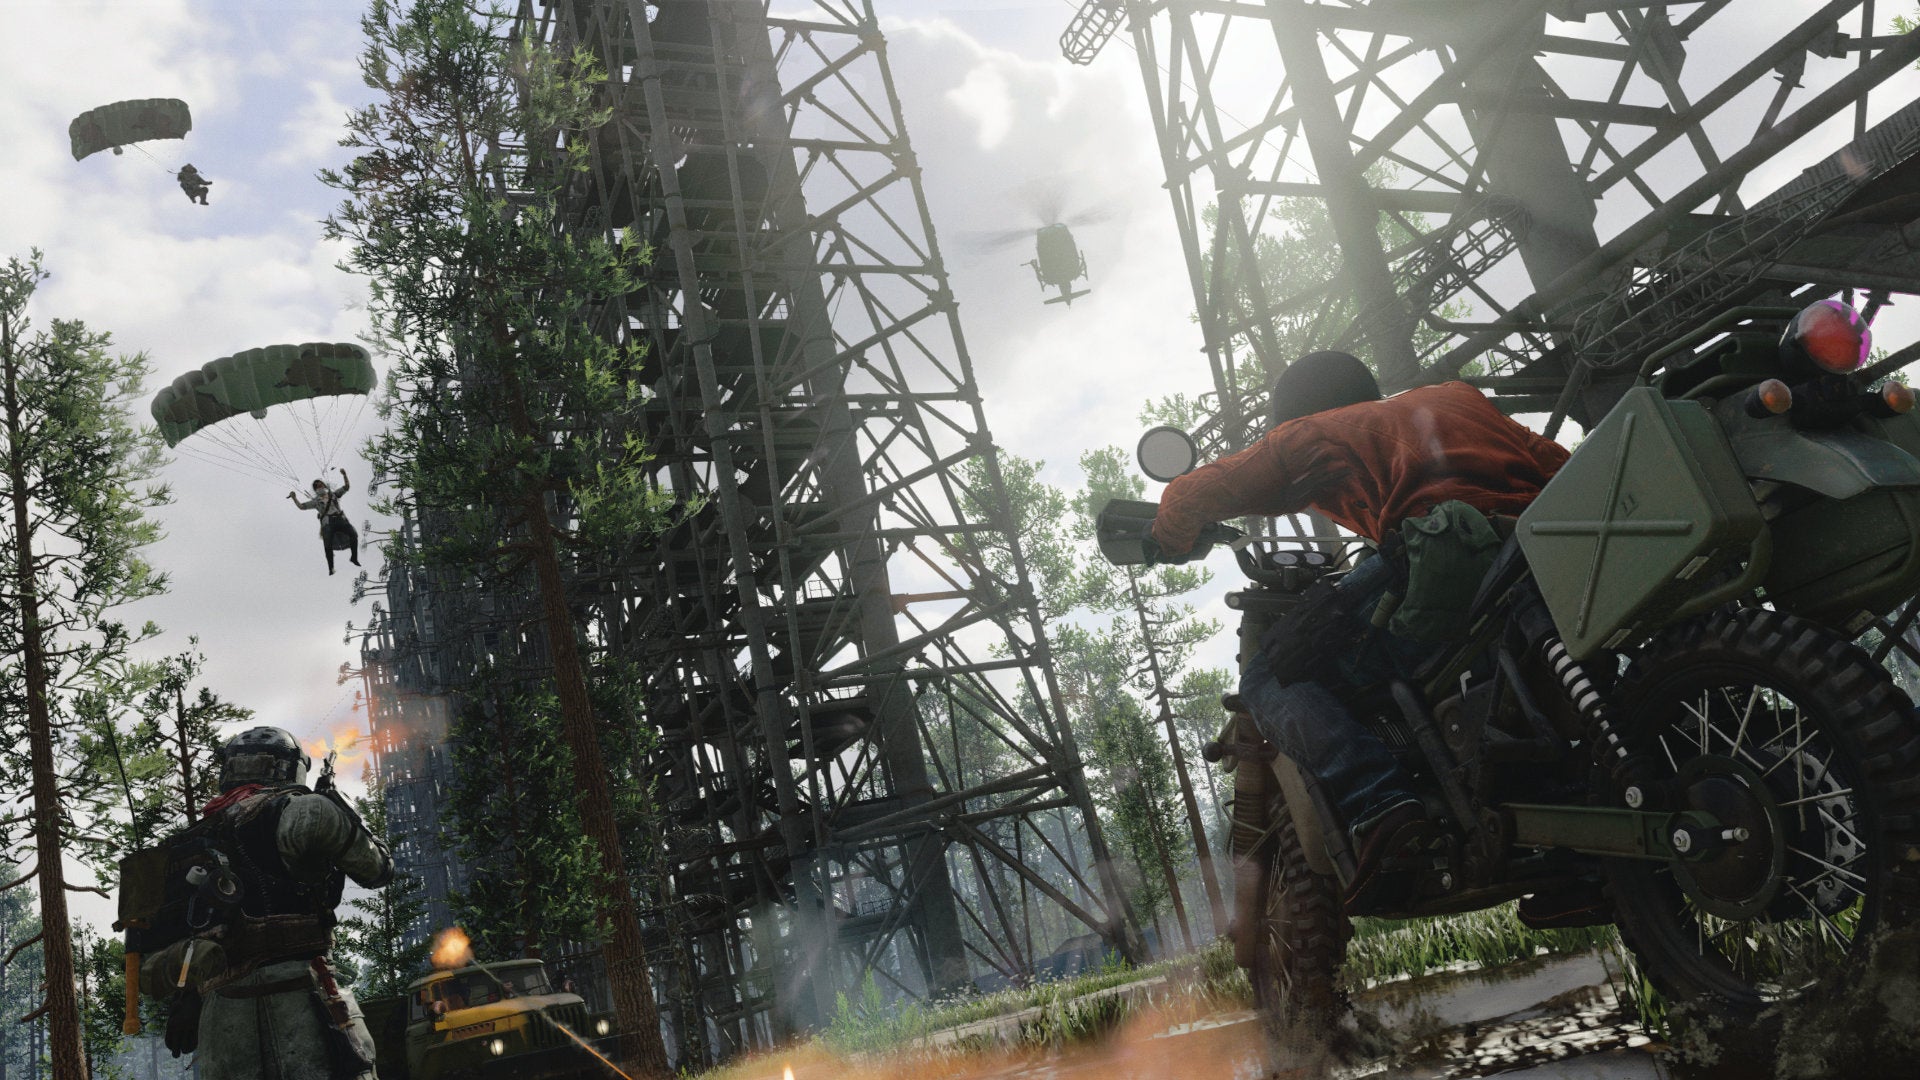 Dirt bikes and parachutes near the Verdansk Array in Call of Duty: Warzone